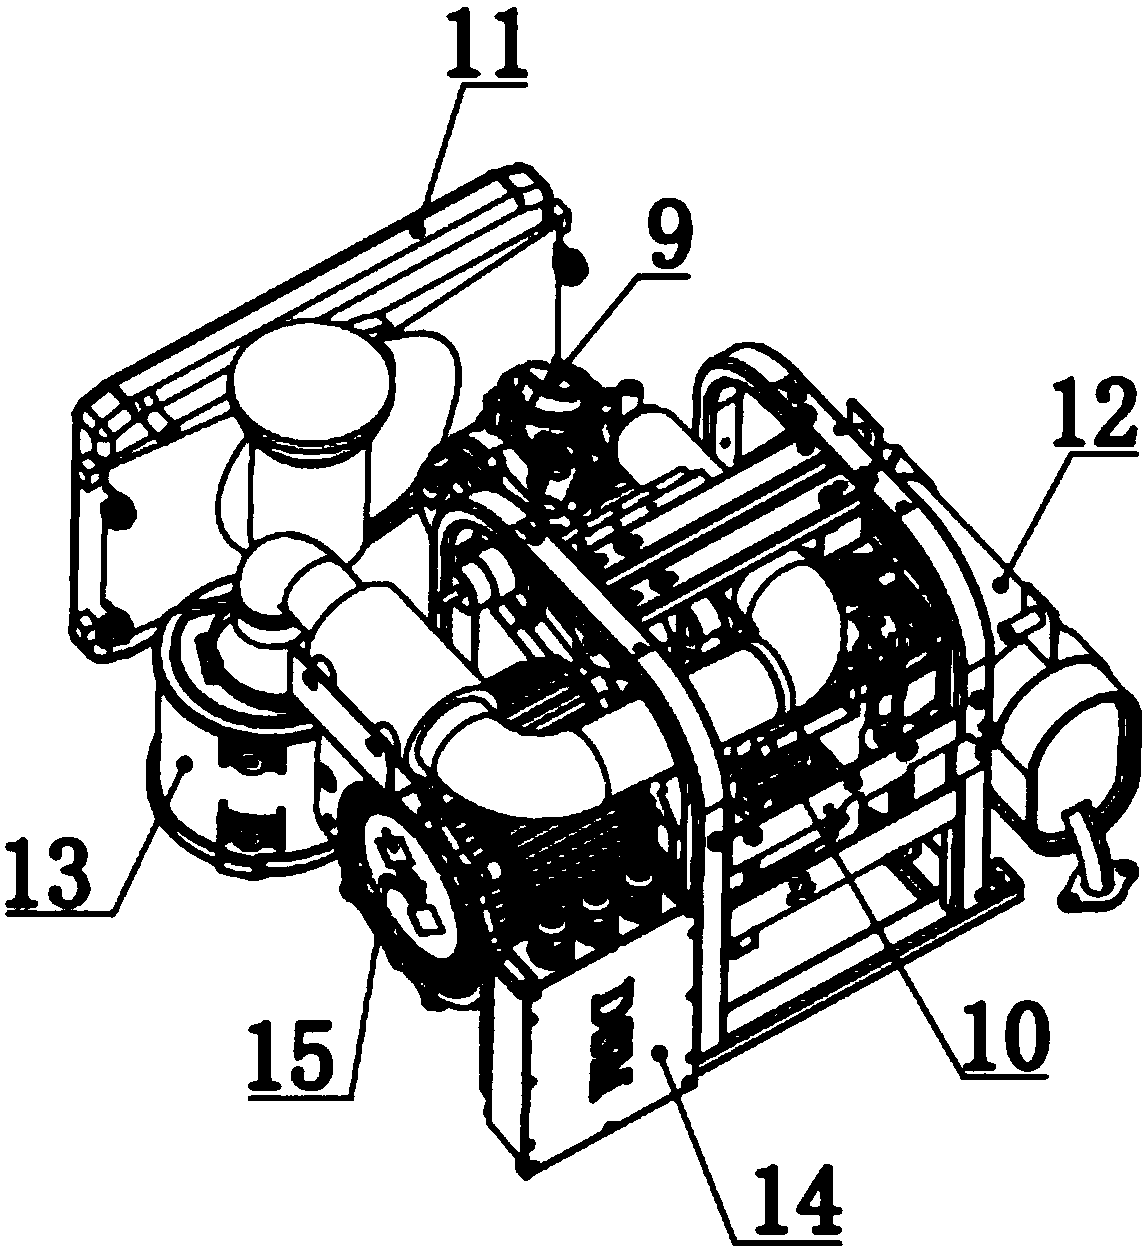 A vehicle-mounted DC auxiliary power supply for an extended-range electric vehicle